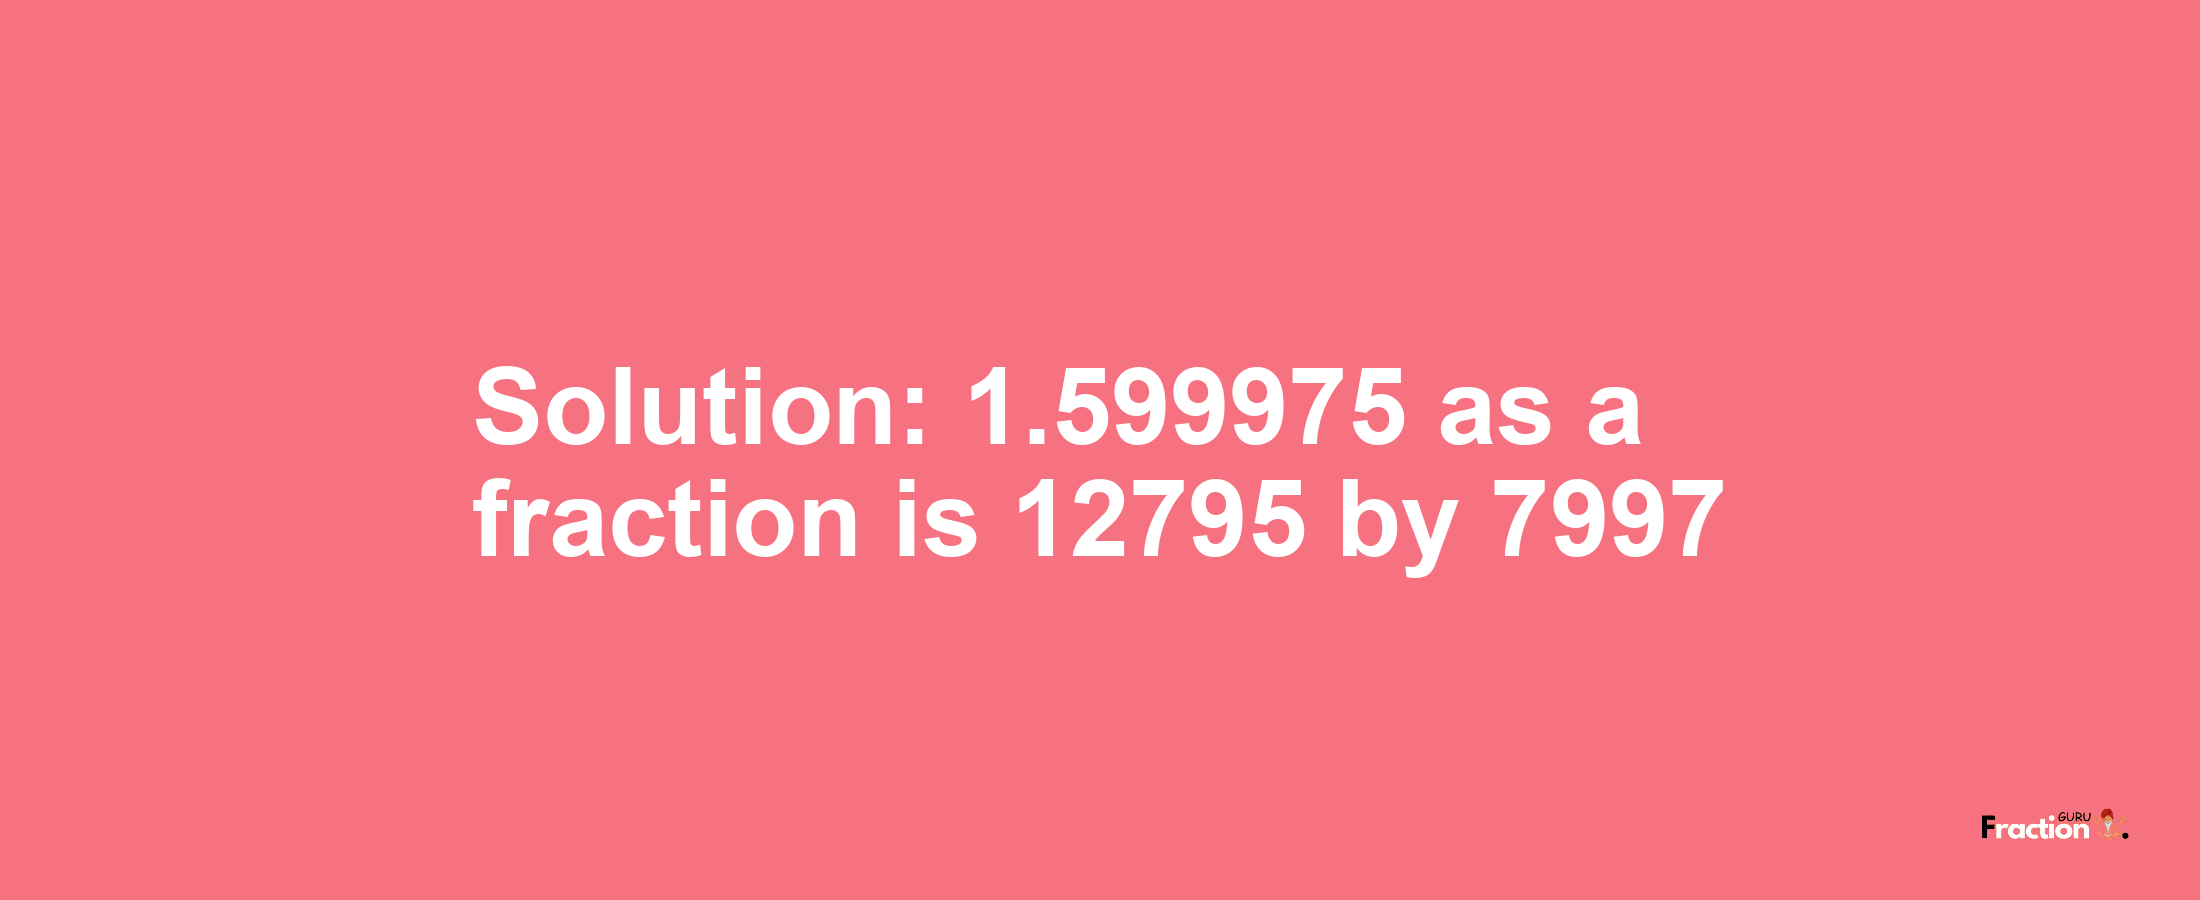 Solution:1.599975 as a fraction is 12795/7997